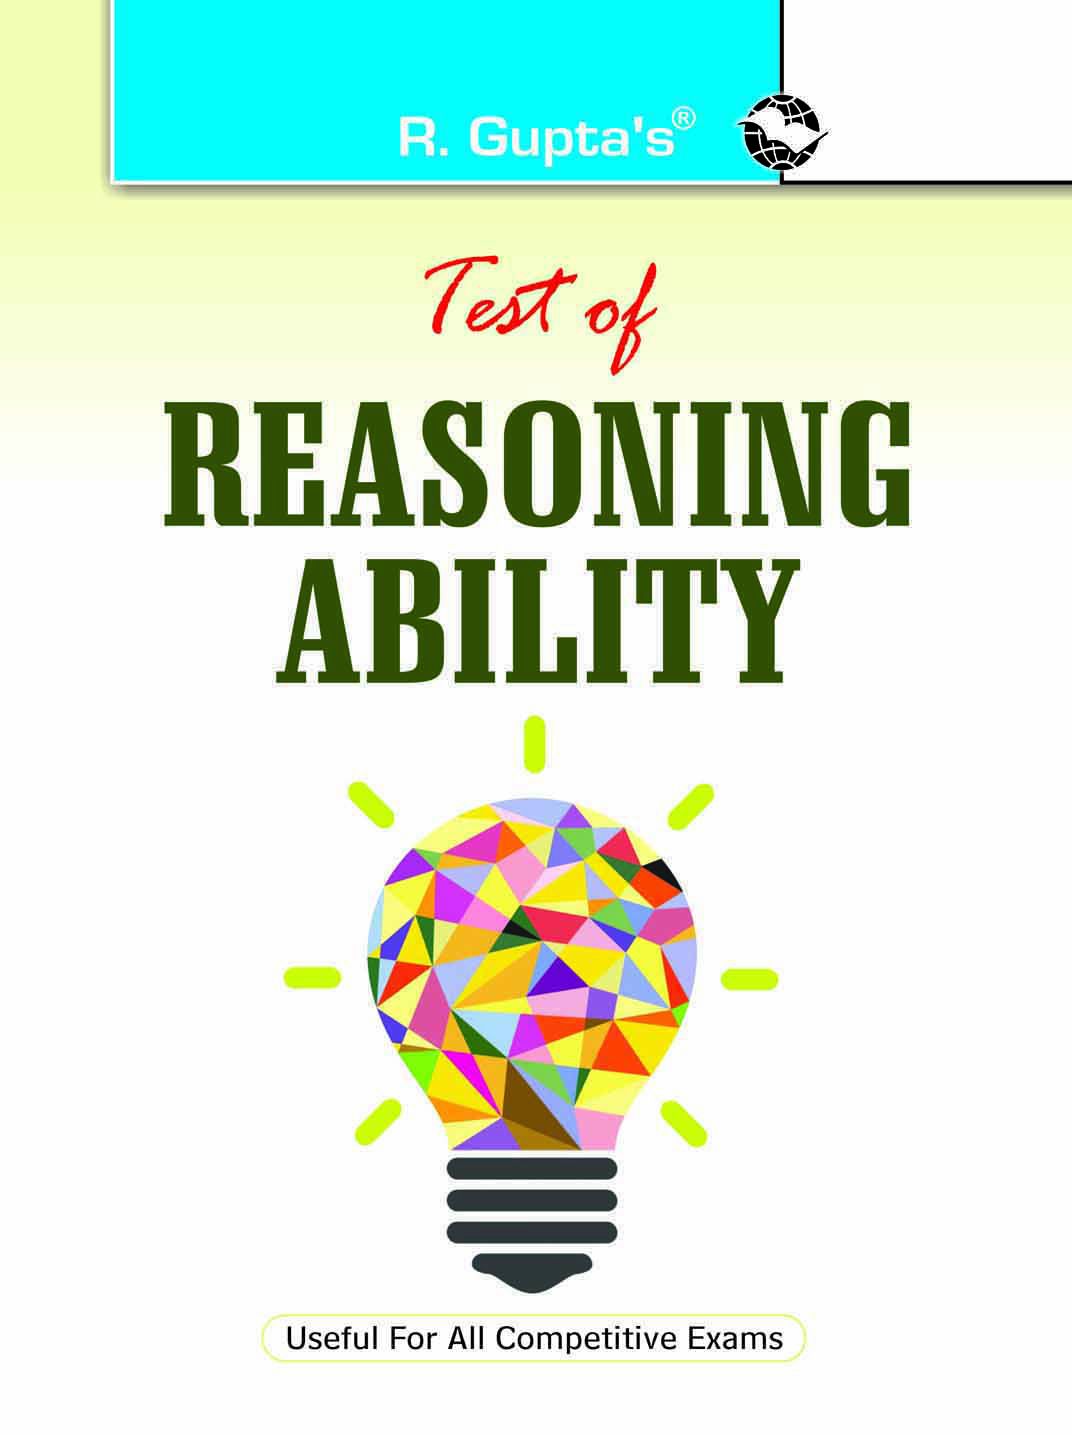     			Test of Reasoning Ability